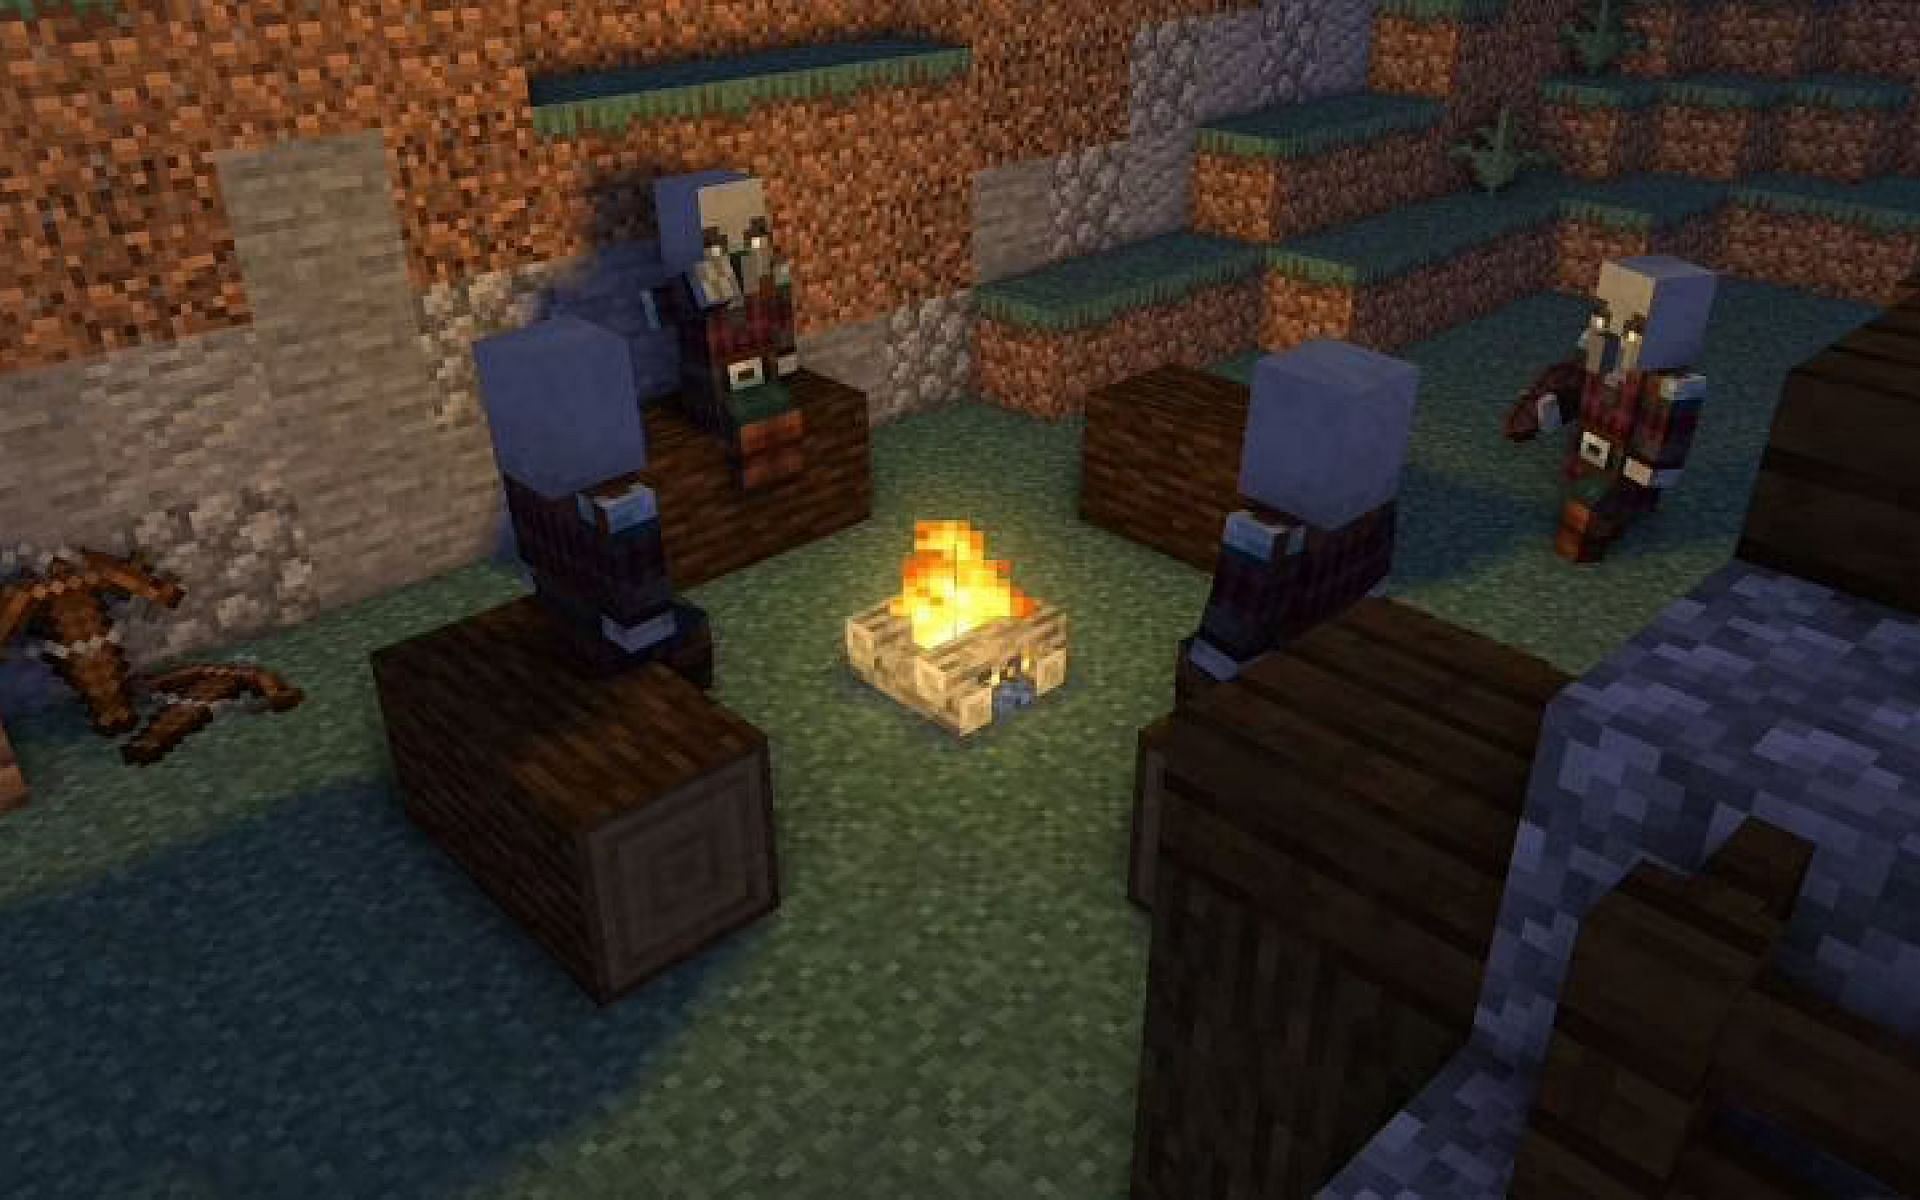 Pillager raids are a dangerous event in-game. Image via Minecraft.